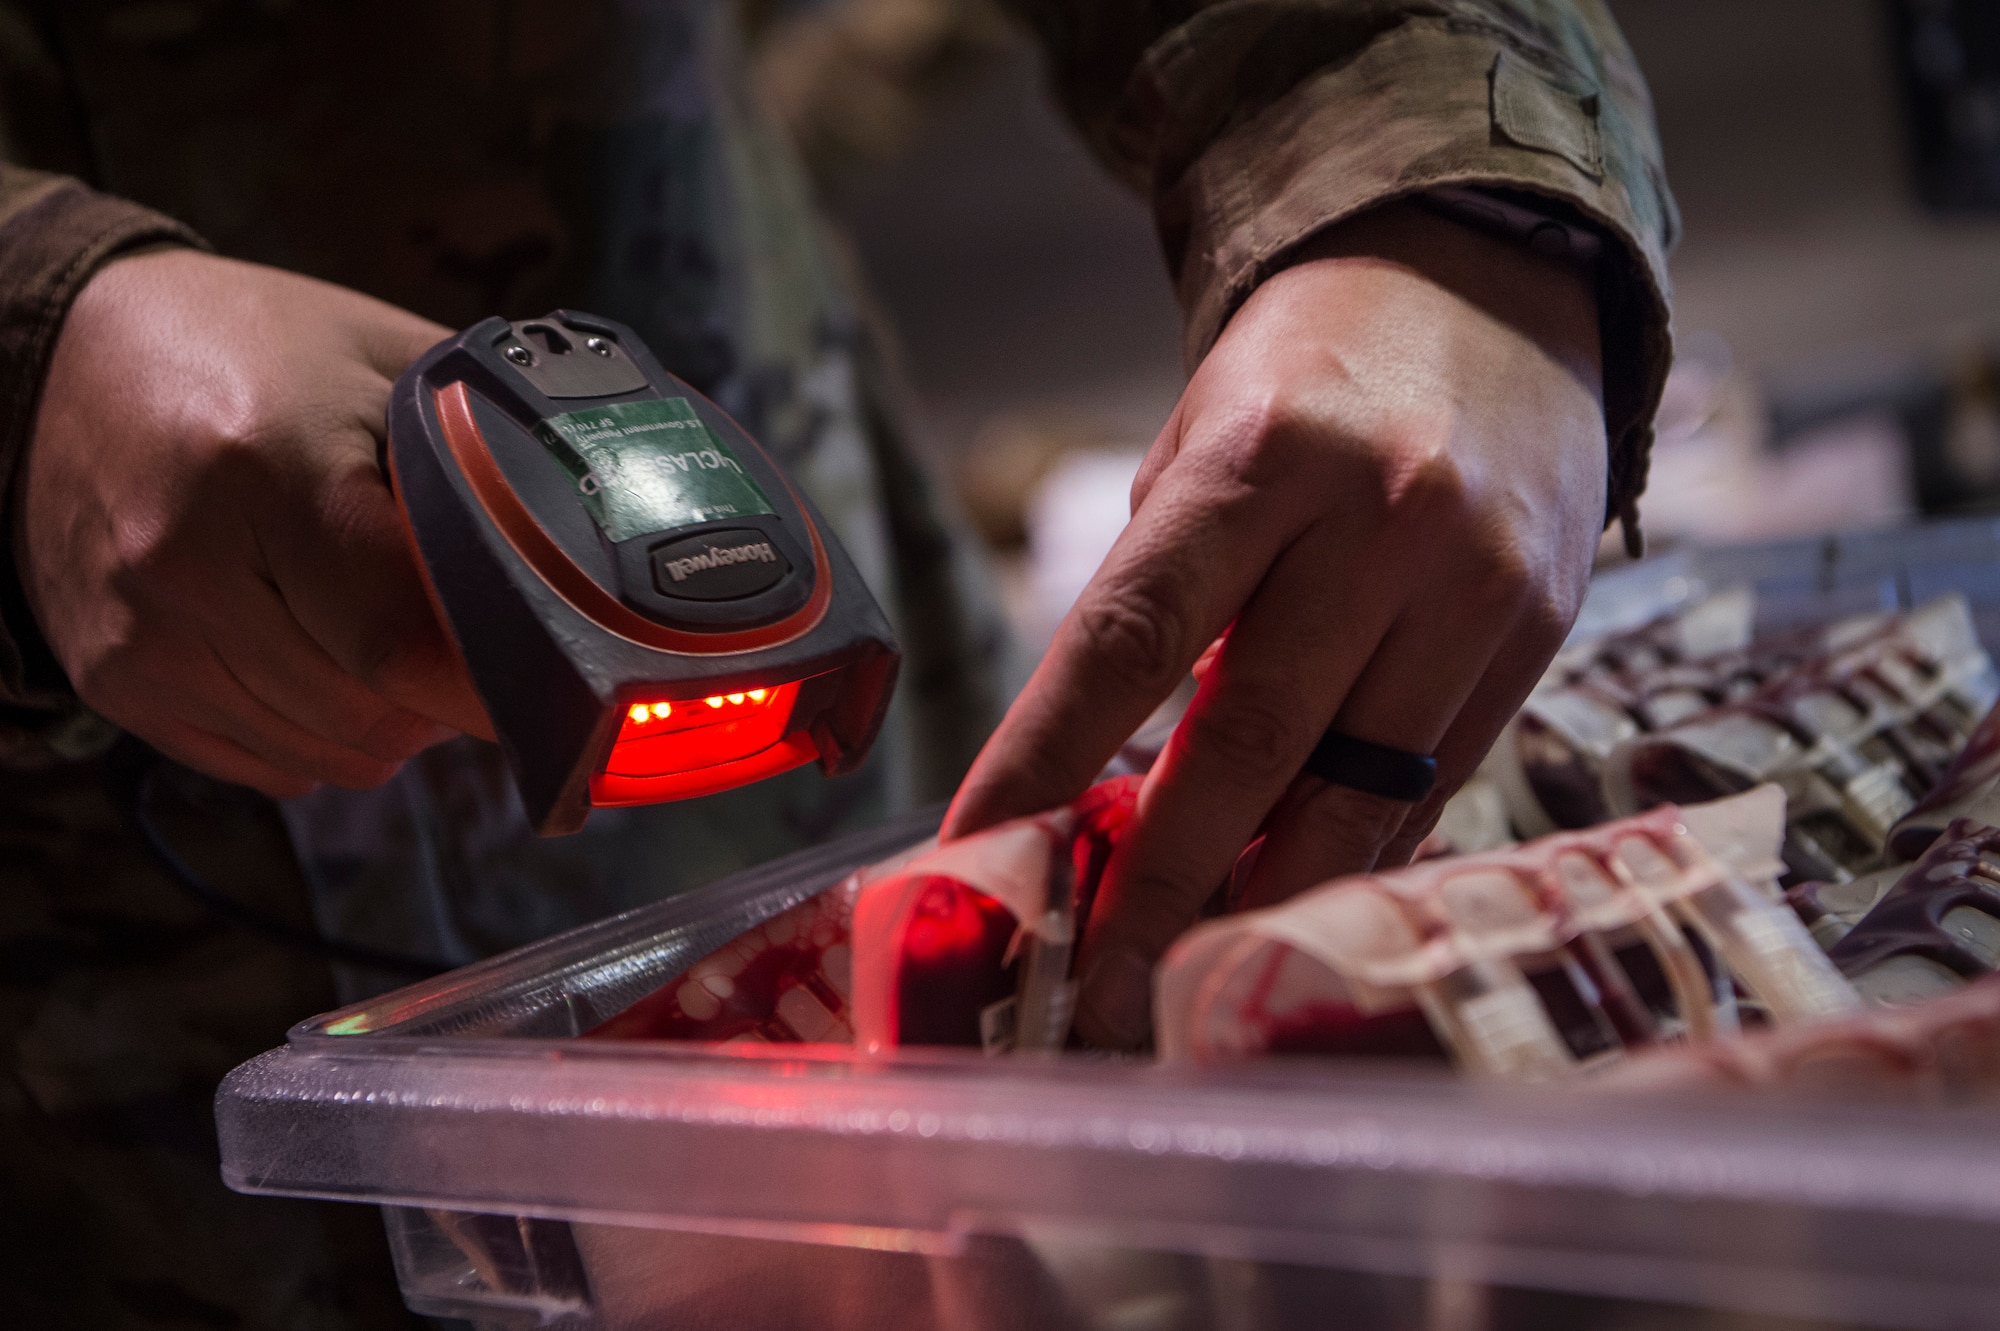 Tech. Sgt. Federico Arriaga, 379th Expeditionary Medical Group Blood Transshipment Center (BTC) logistics craftsman, scans barcodes of blood containers in the BTC Jan. 9, 2019, at Al Udeid Air Base, Qatar. The BTC is comprised of a four-person team that orchestrates the flow of blood and platelet products to 72 forward operating locations and eight mobile field surgical teams throughout U.S. Central Command’s area of responsibility. (U.S. Air Force by Tech. Sgt. Christopher Hubenthal)